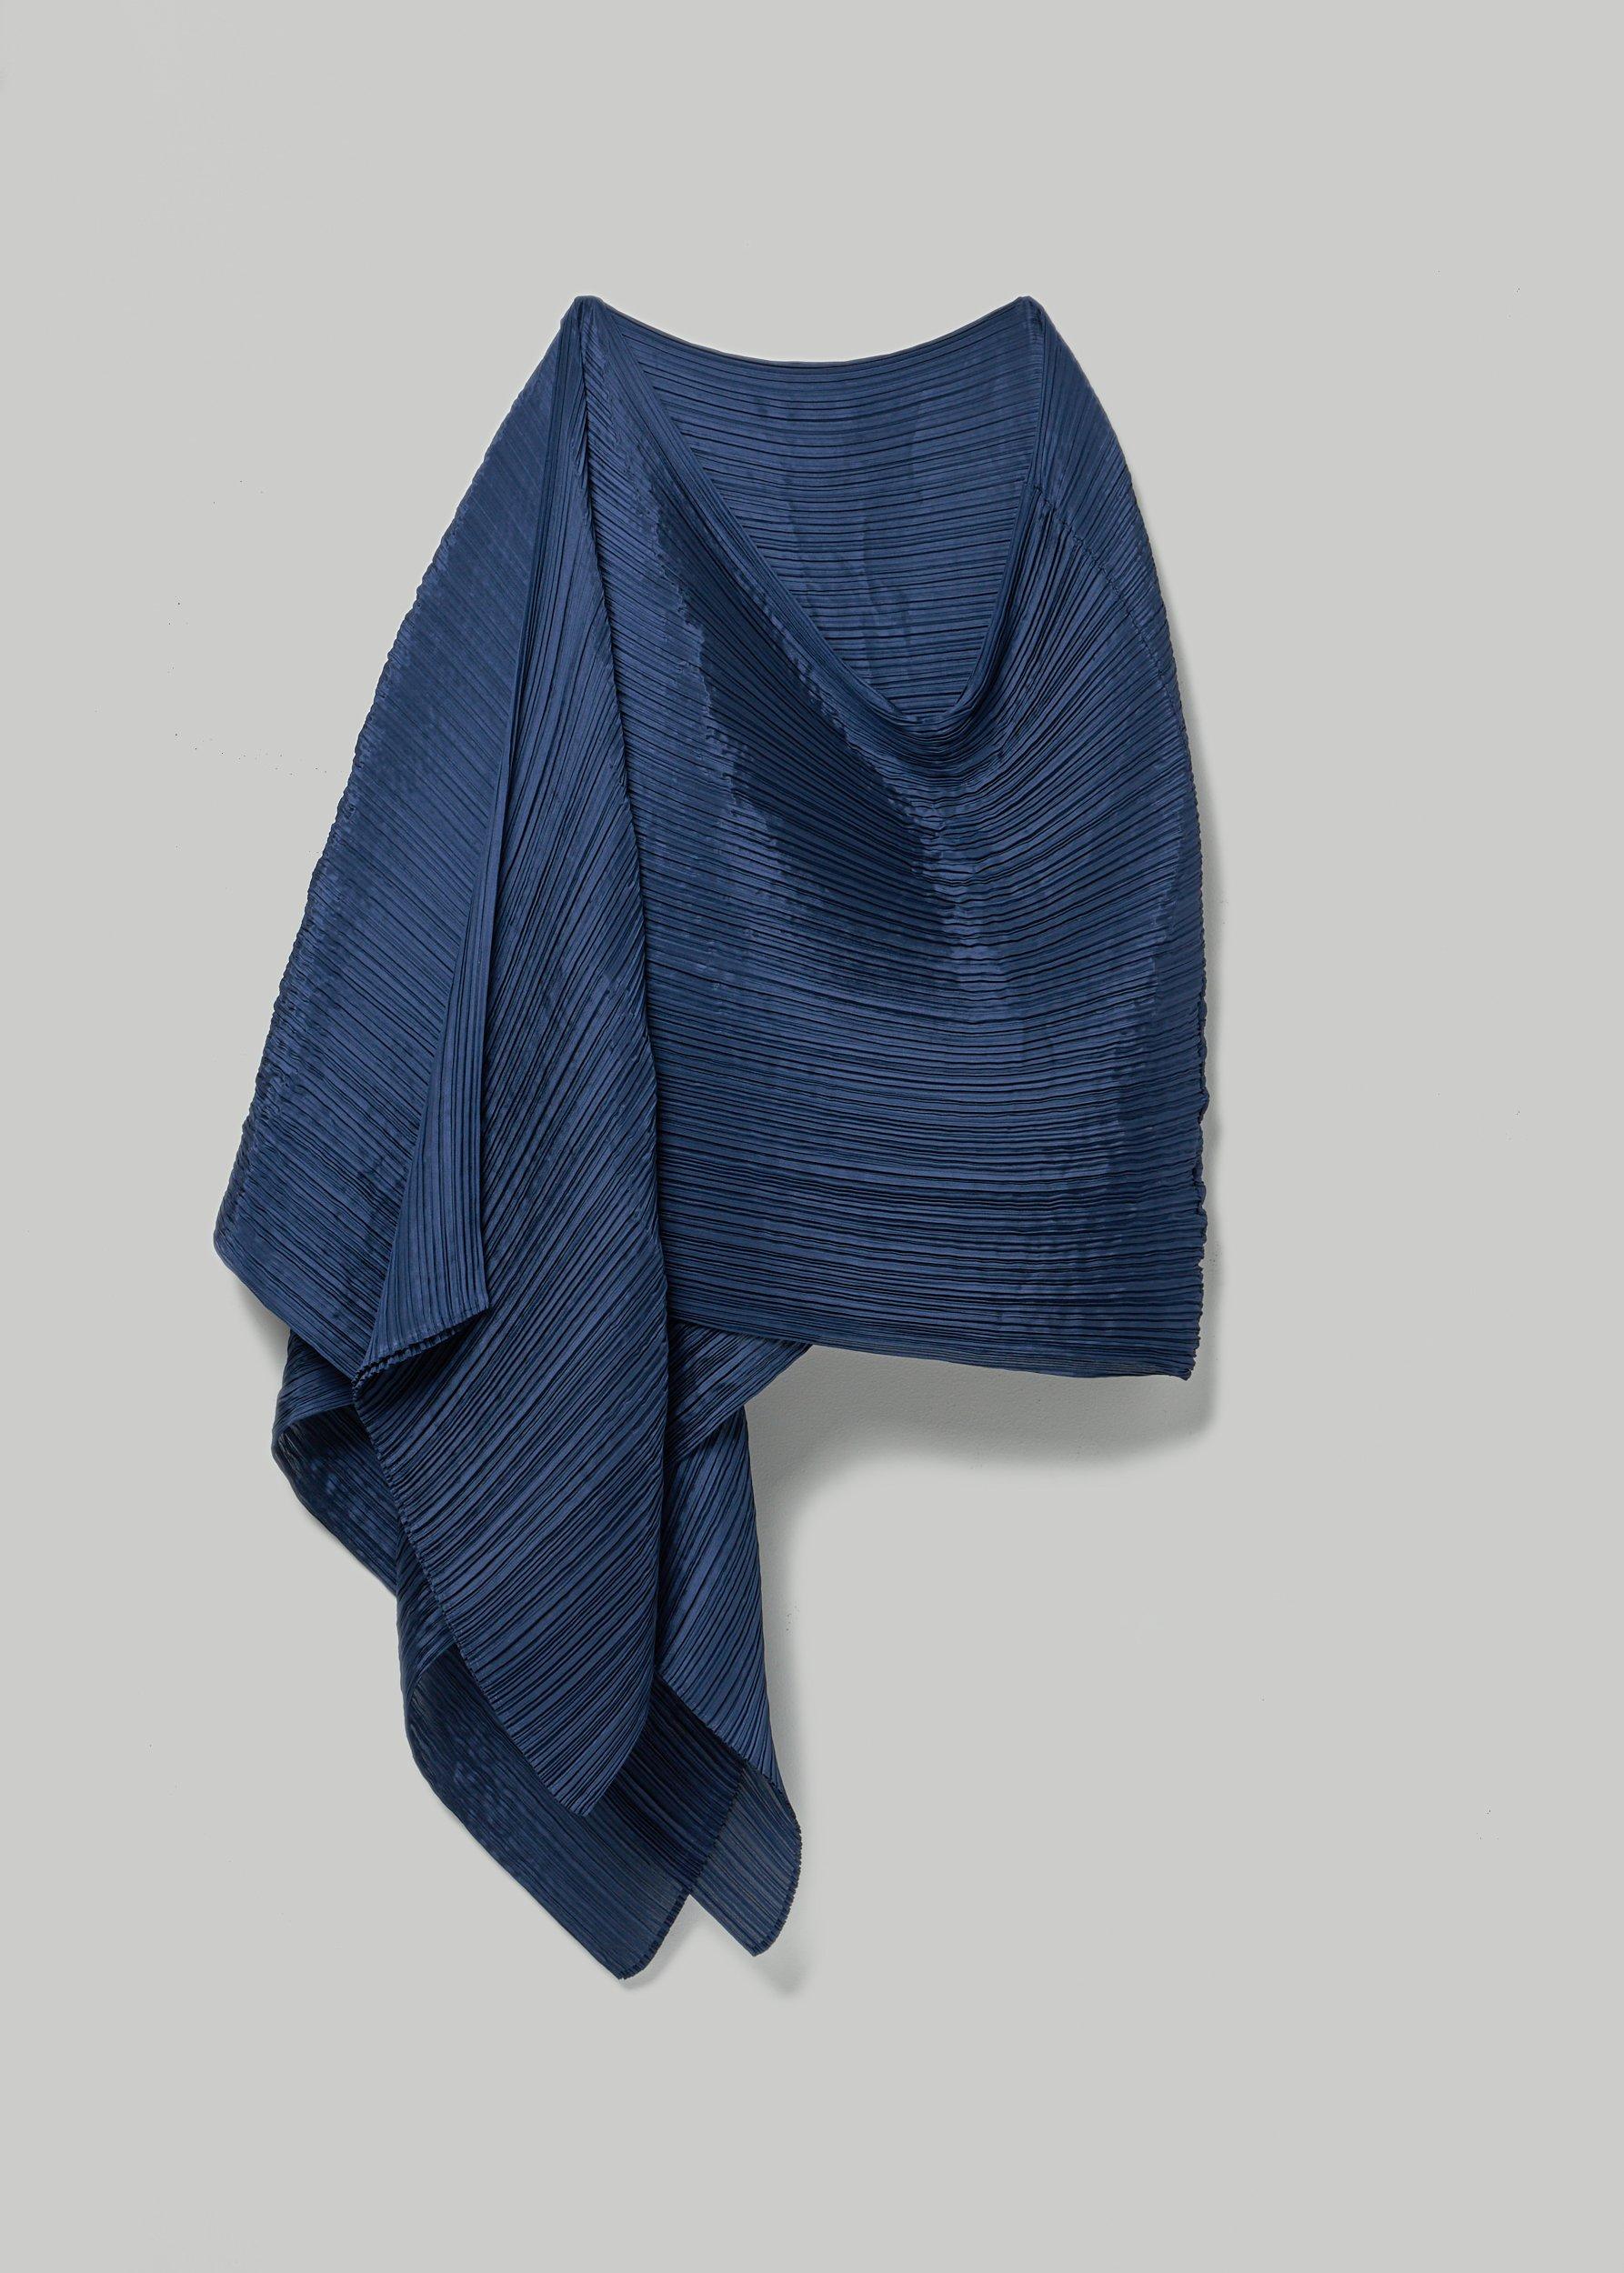 Pleats Please Issey Miyake Synthetic Madame T Scarf in Blue - Lyst